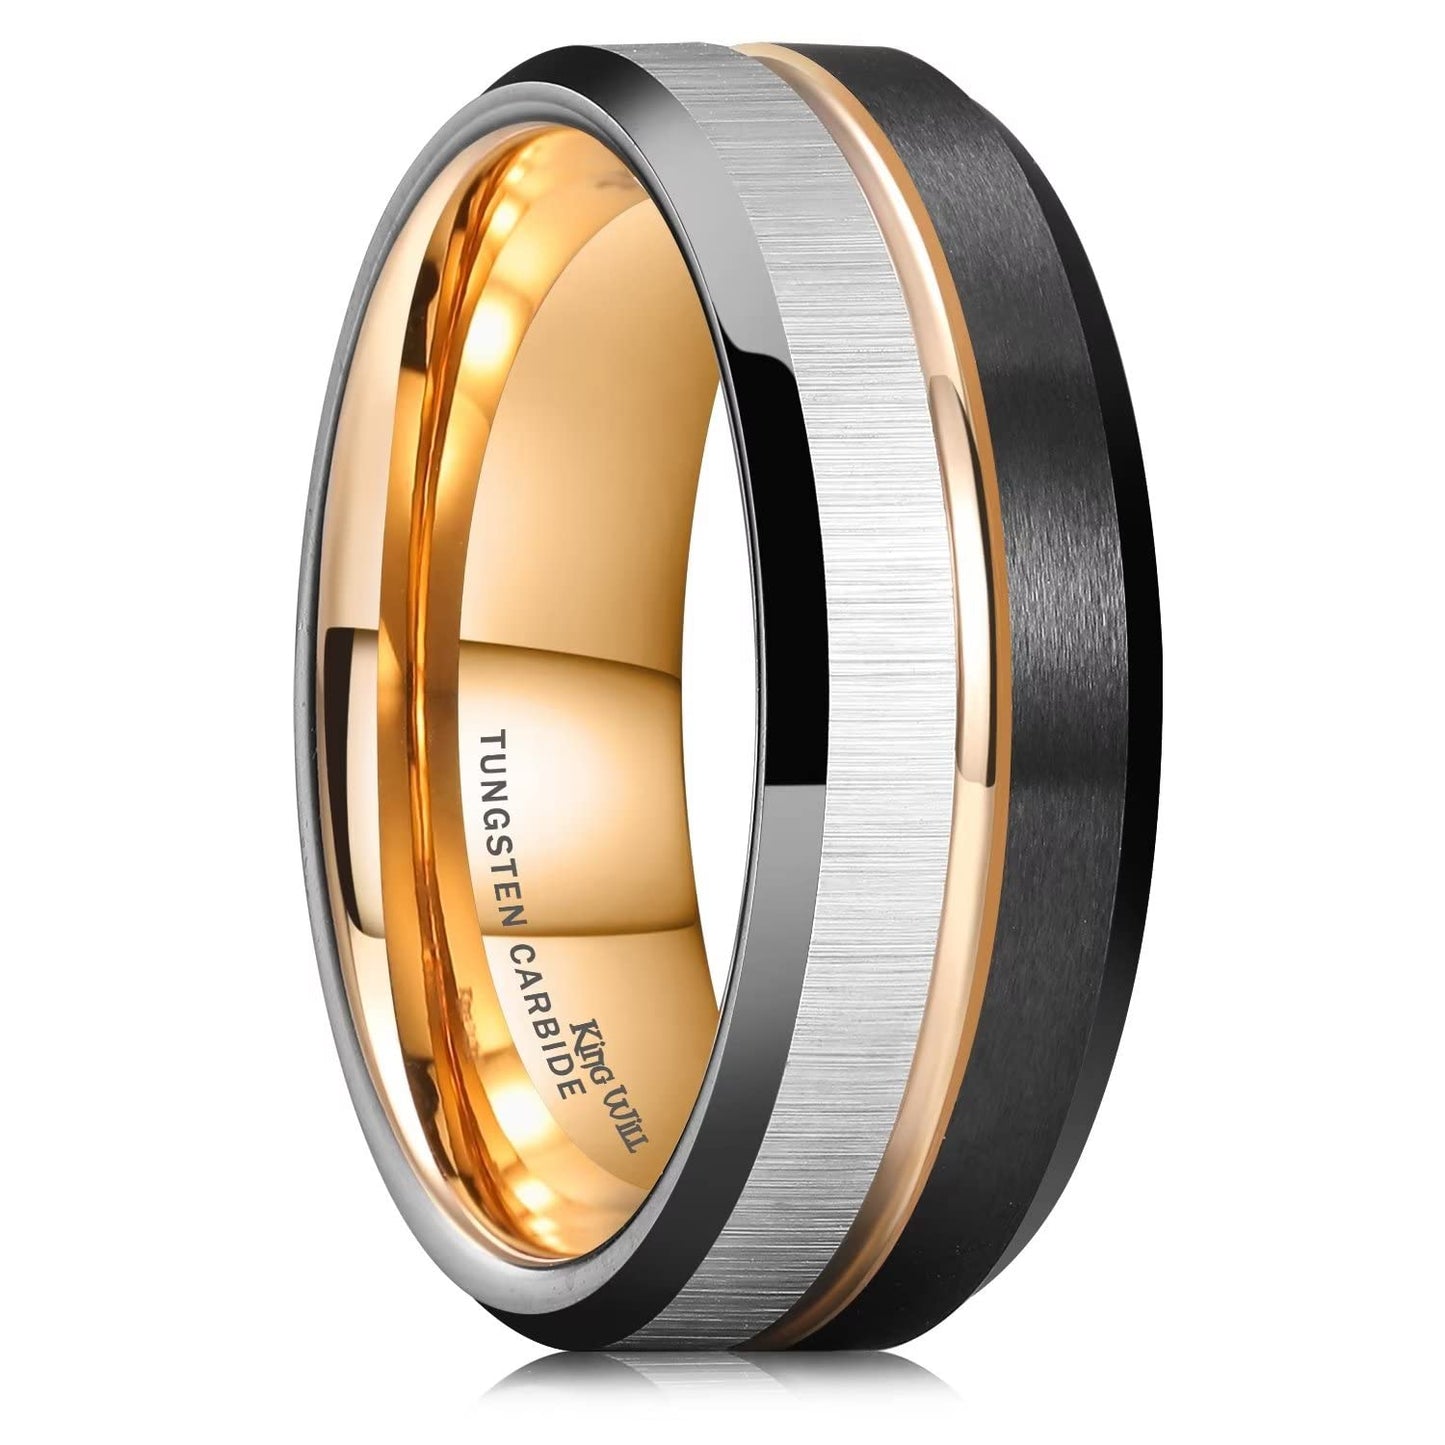 King Will Loop Tungsten Carbide Ring for Men Women Centre Rose Gold Groove Wedding Bands Surface Silver Transverse Stripes Brushed Finish And Black Matte Rose Gold Comfort Fit 9.5